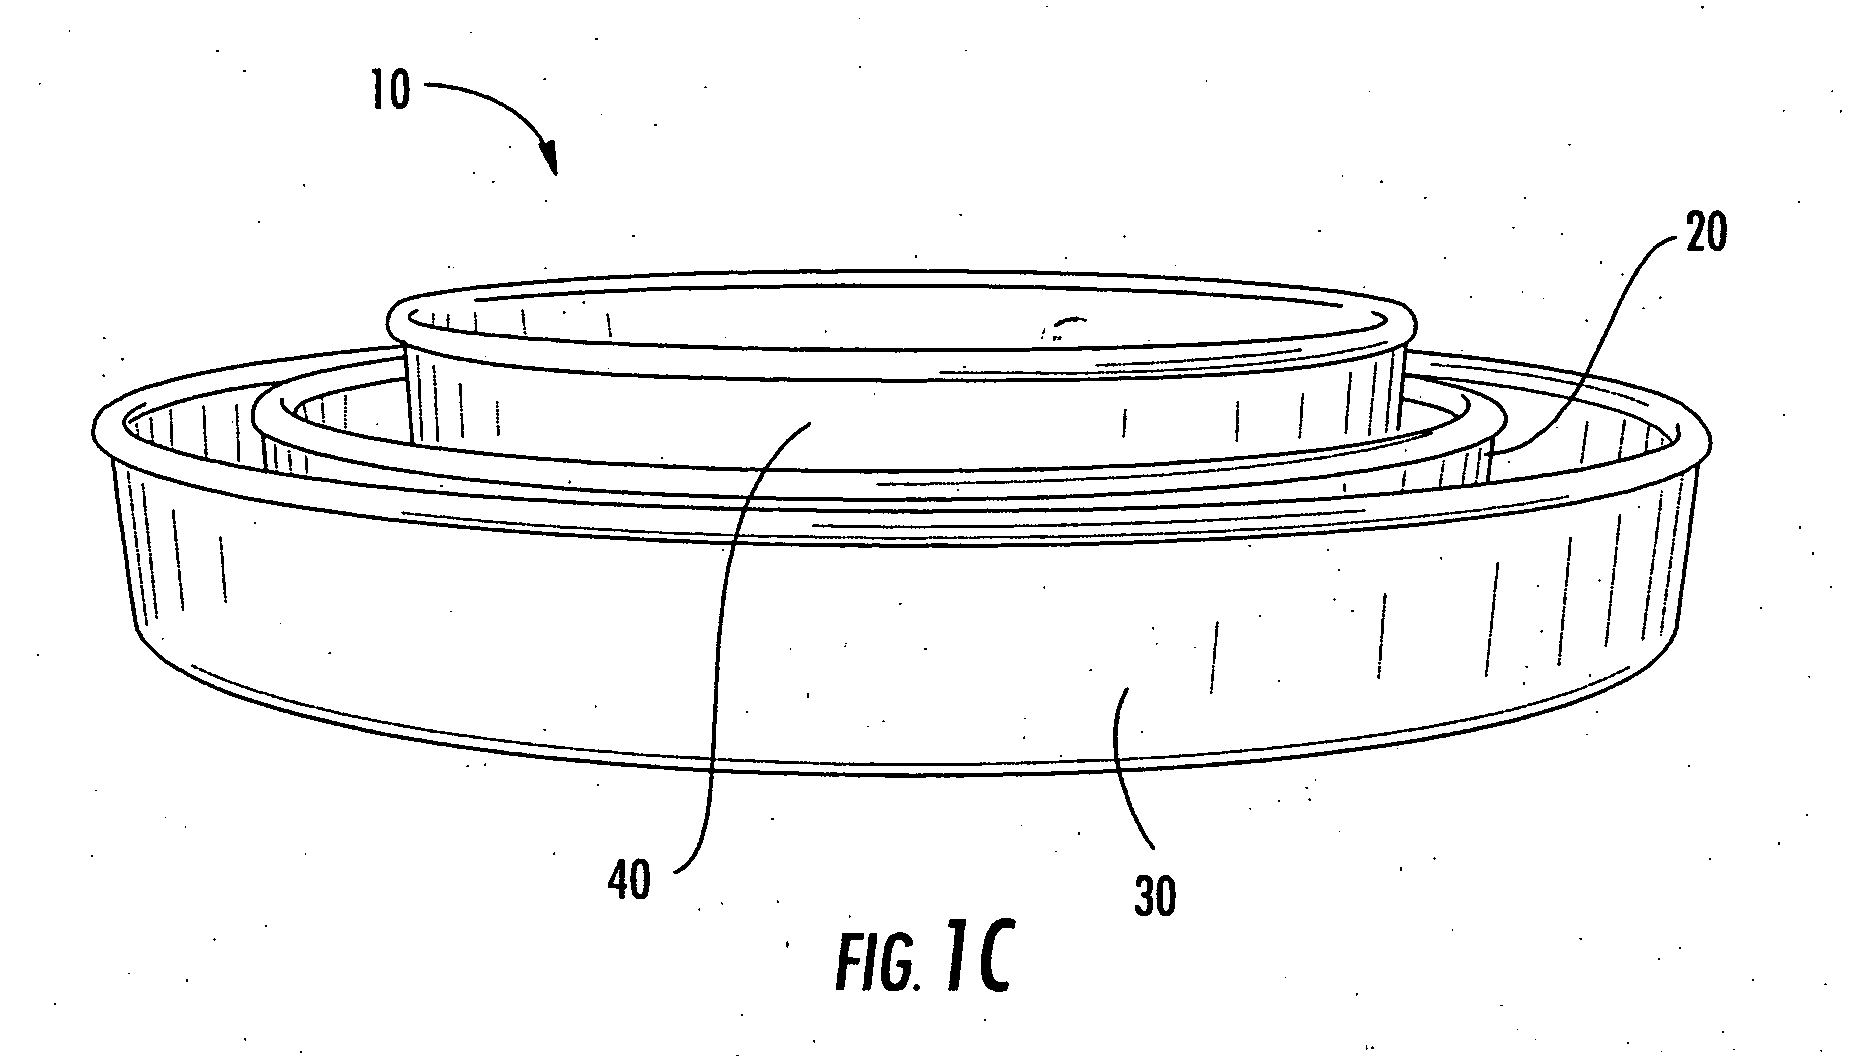 Baking apparatuses and methods of use